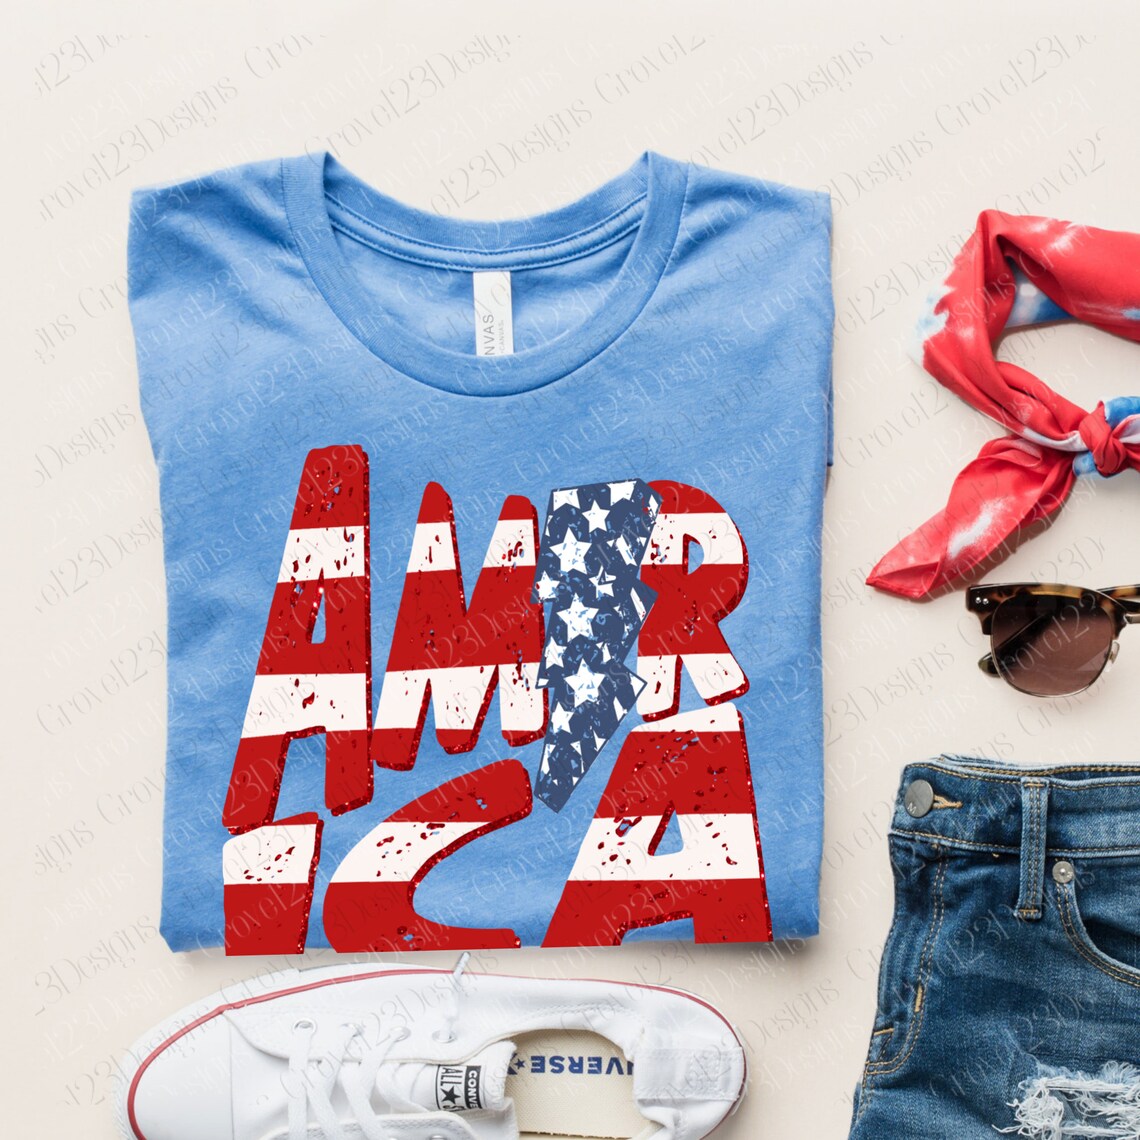 America Soft Style Tee -Unisex Toddler, Youth, and Adult Sized USA Shirt/ July 4th Shirt